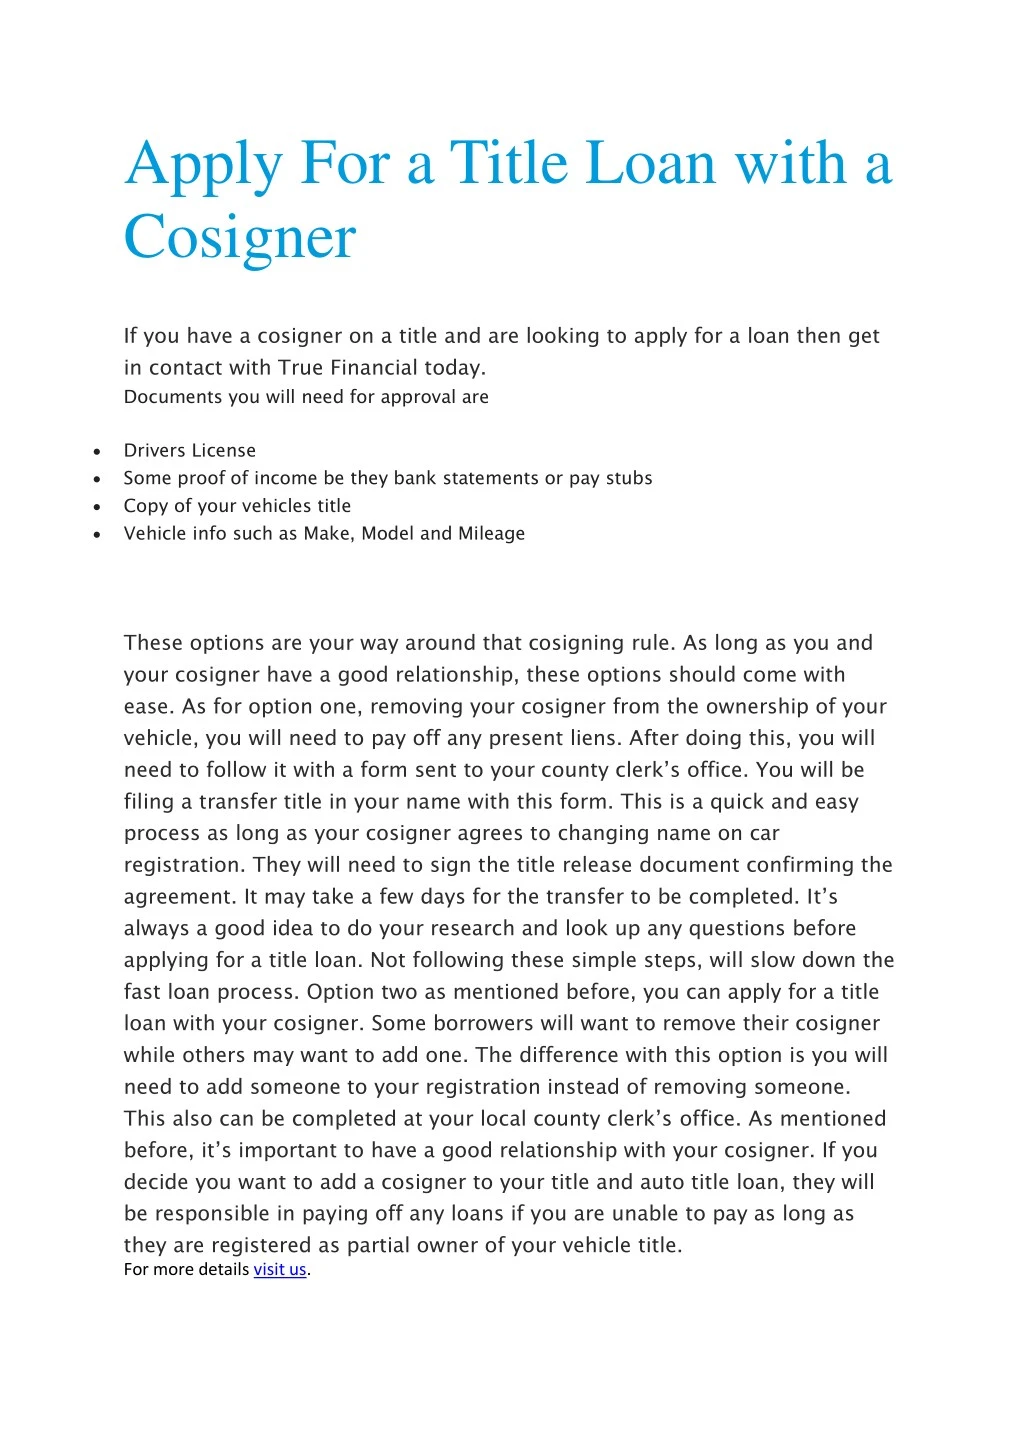 apply for a title loan with a cosigner